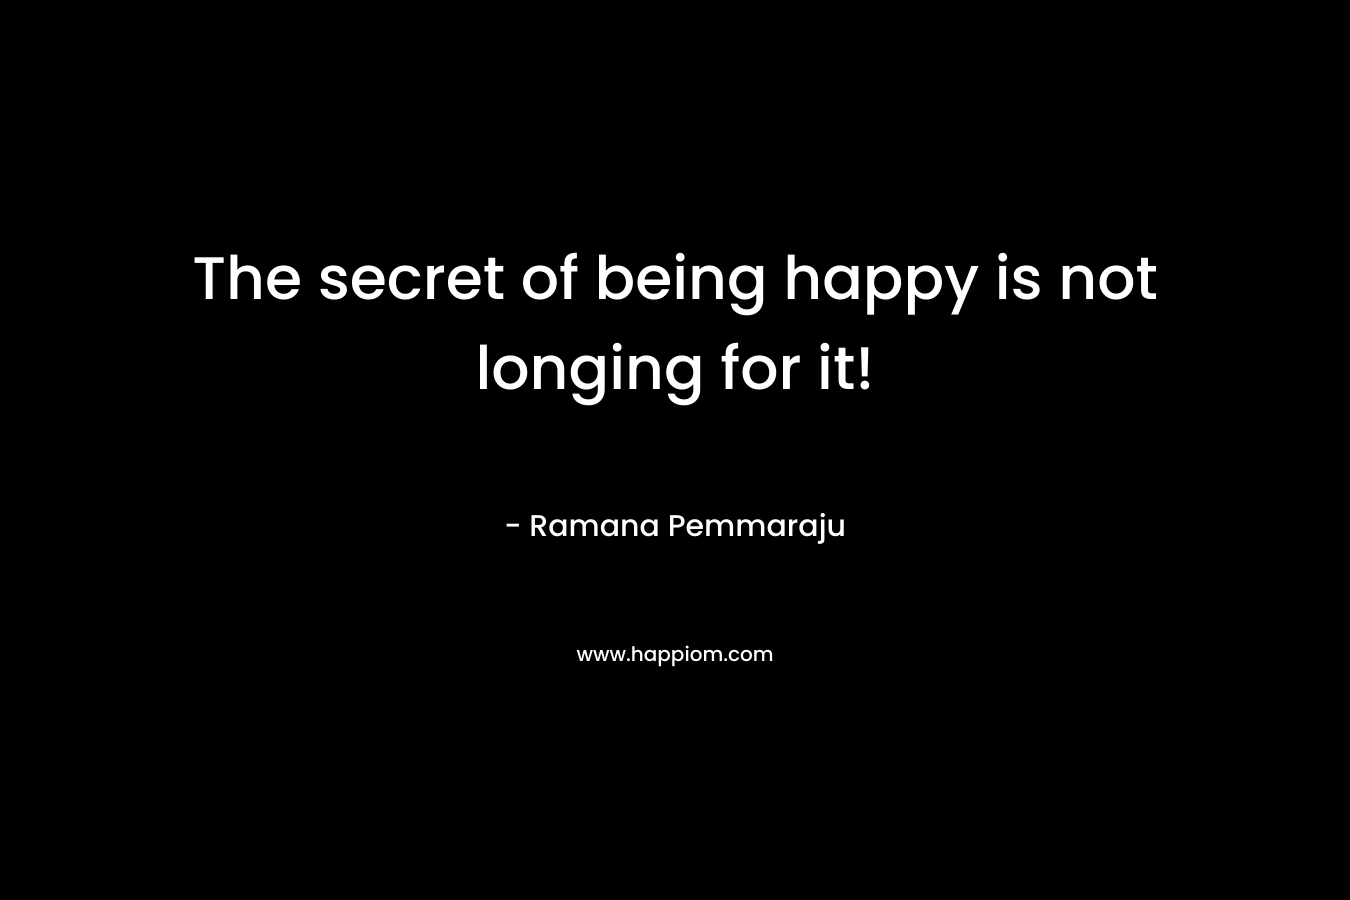 The secret of being happy is not longing for it!